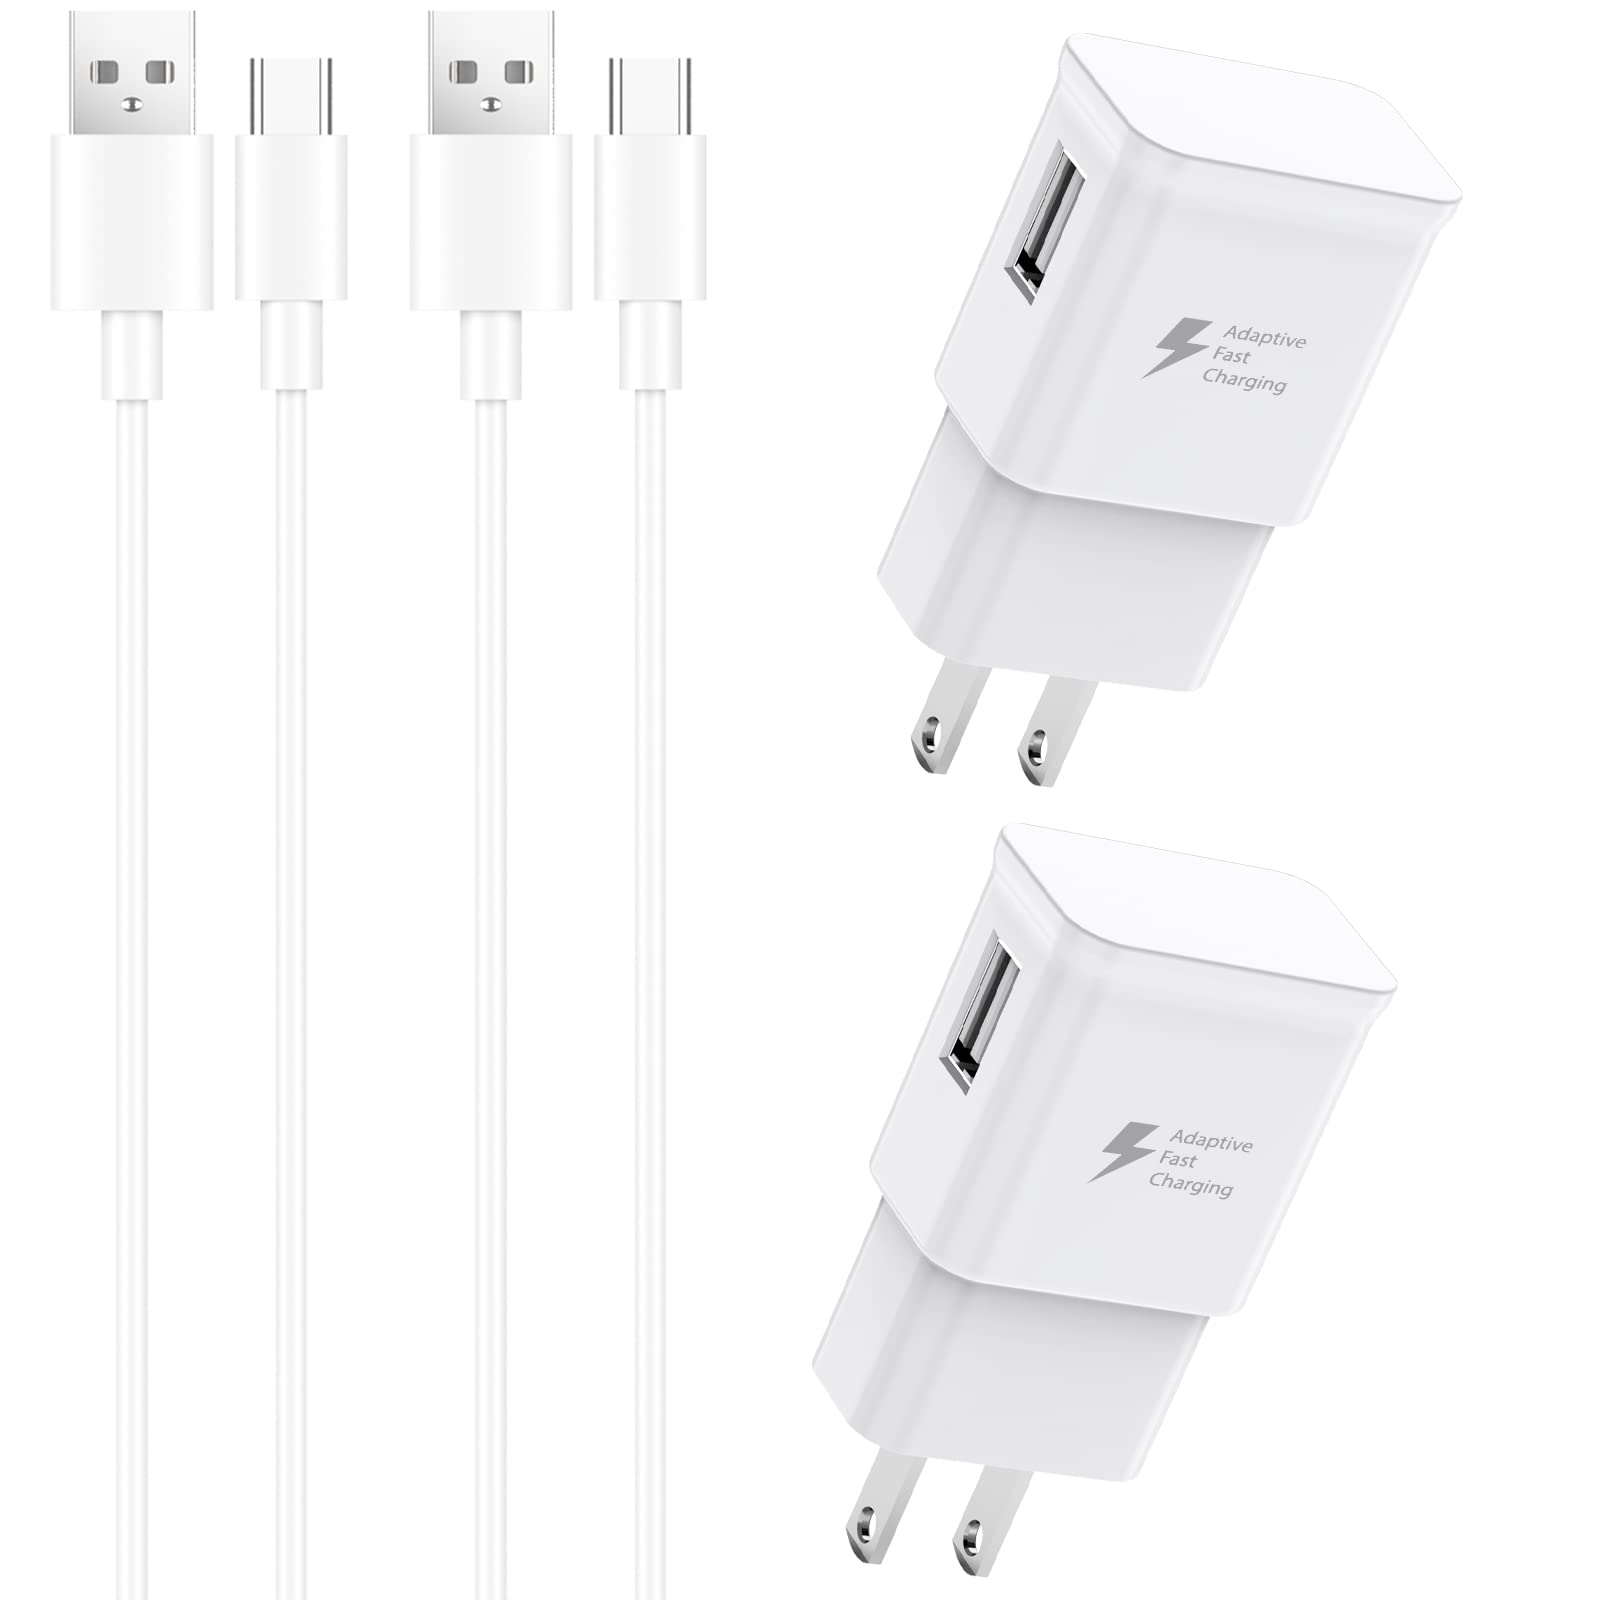 Samsung Charger Fast Charging with USB Type C Cable 6FT for Samsung Galaxy S10/S10e/S10 Plus/S9/S9 Plus/S8/S8 Plus/S20 S21 S22 S23 Ultra/Note 8/Note 9/Note 10/Note 20/A50/A51/A52/A53/A32/A13 [2-Pack]